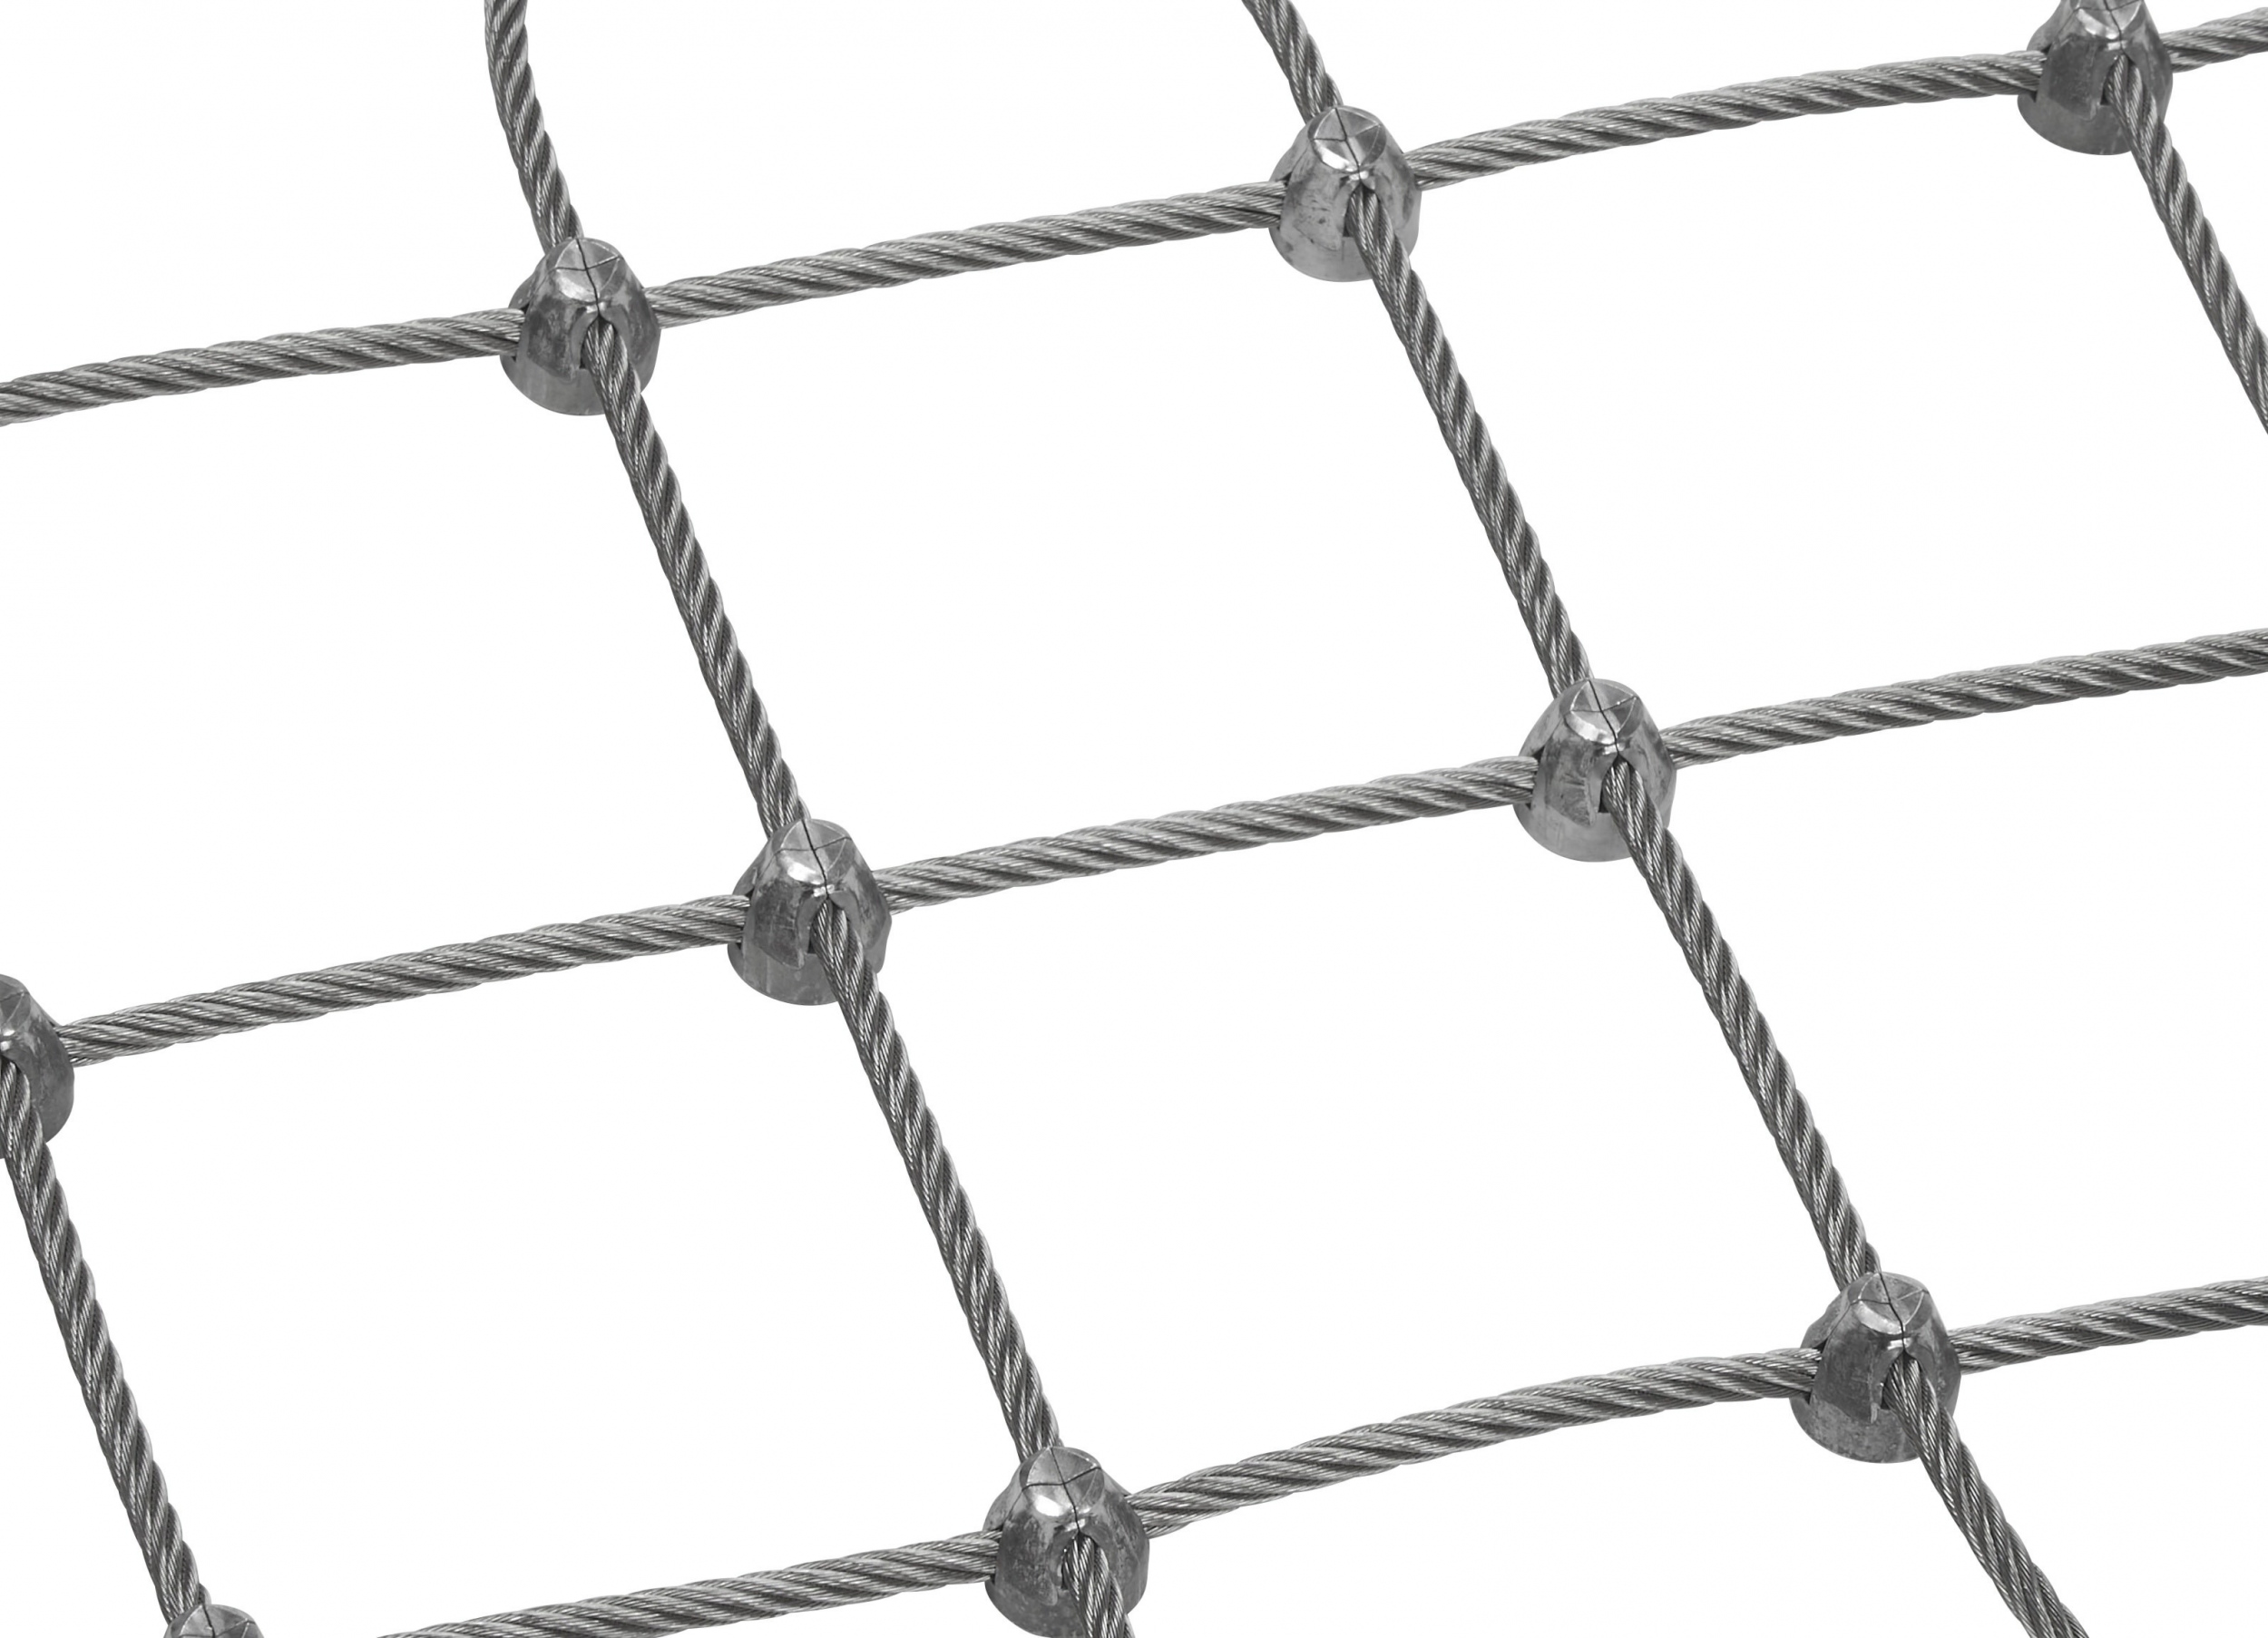 Stainless Steel Stone Quarry Netting (6.0 mm/100 mm)